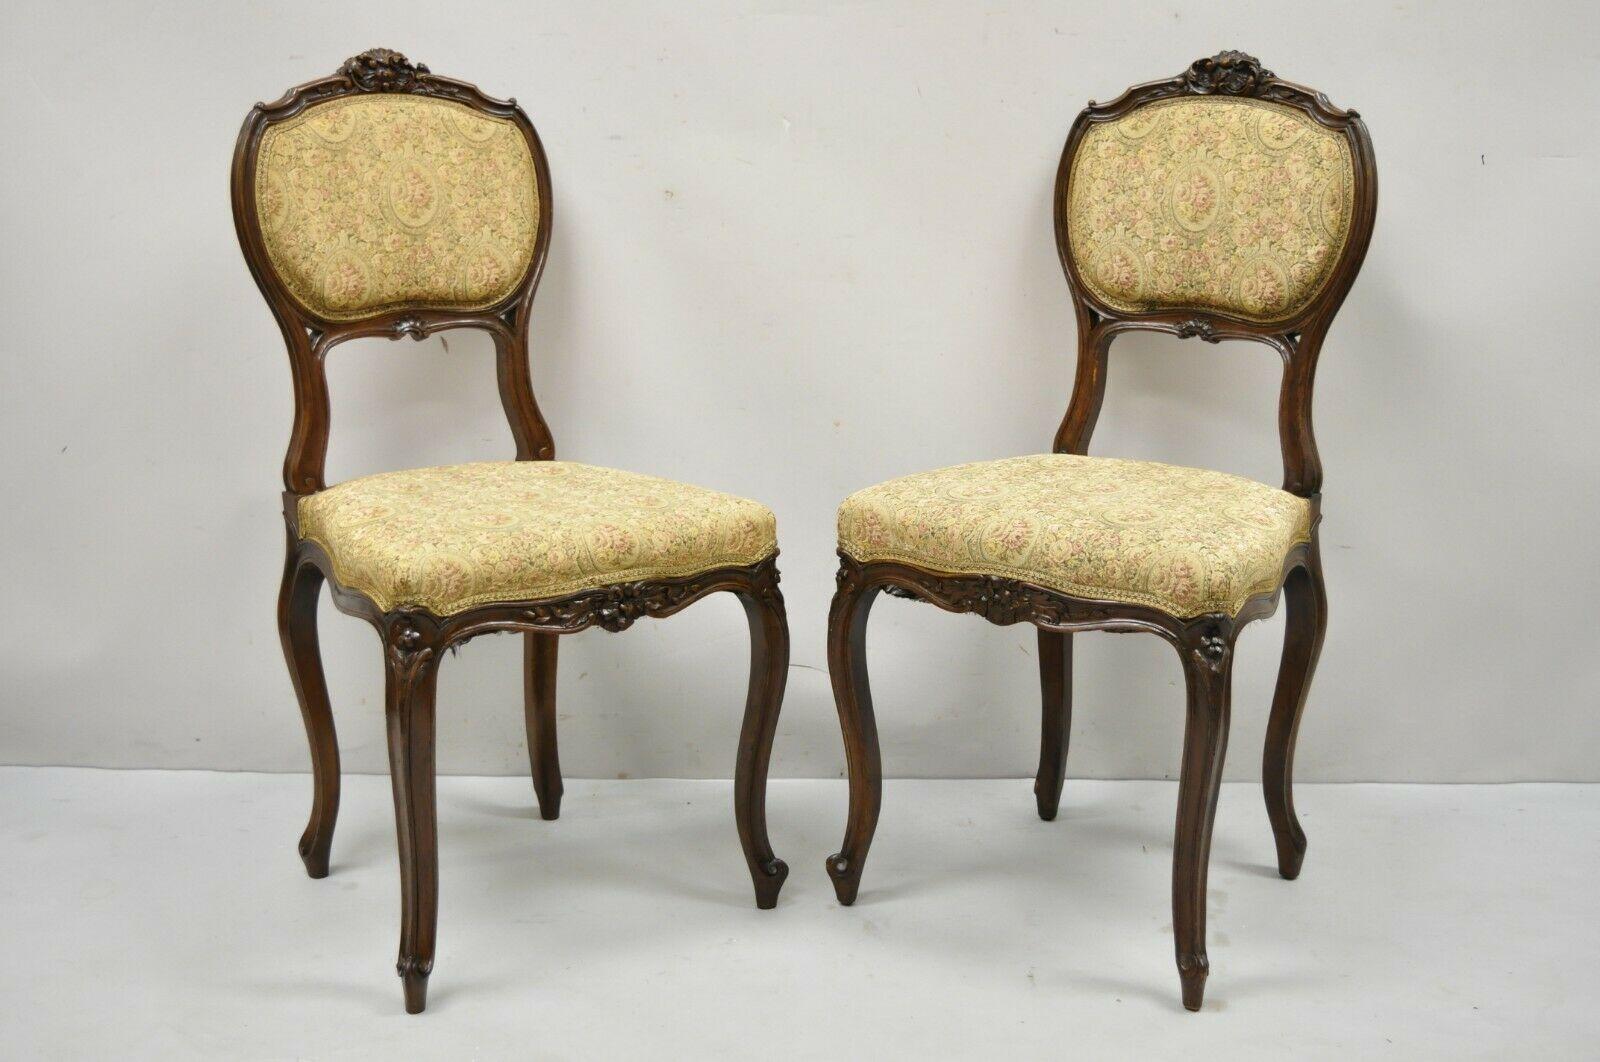 Antique French Victorian mahogany upholstered parlor side chairs by J.B. Van Sciver - set of 4. set includes (4) side chairs, solid wood frames, beautiful wood grain, nicely carved details, original label, very nice antique set, great style and